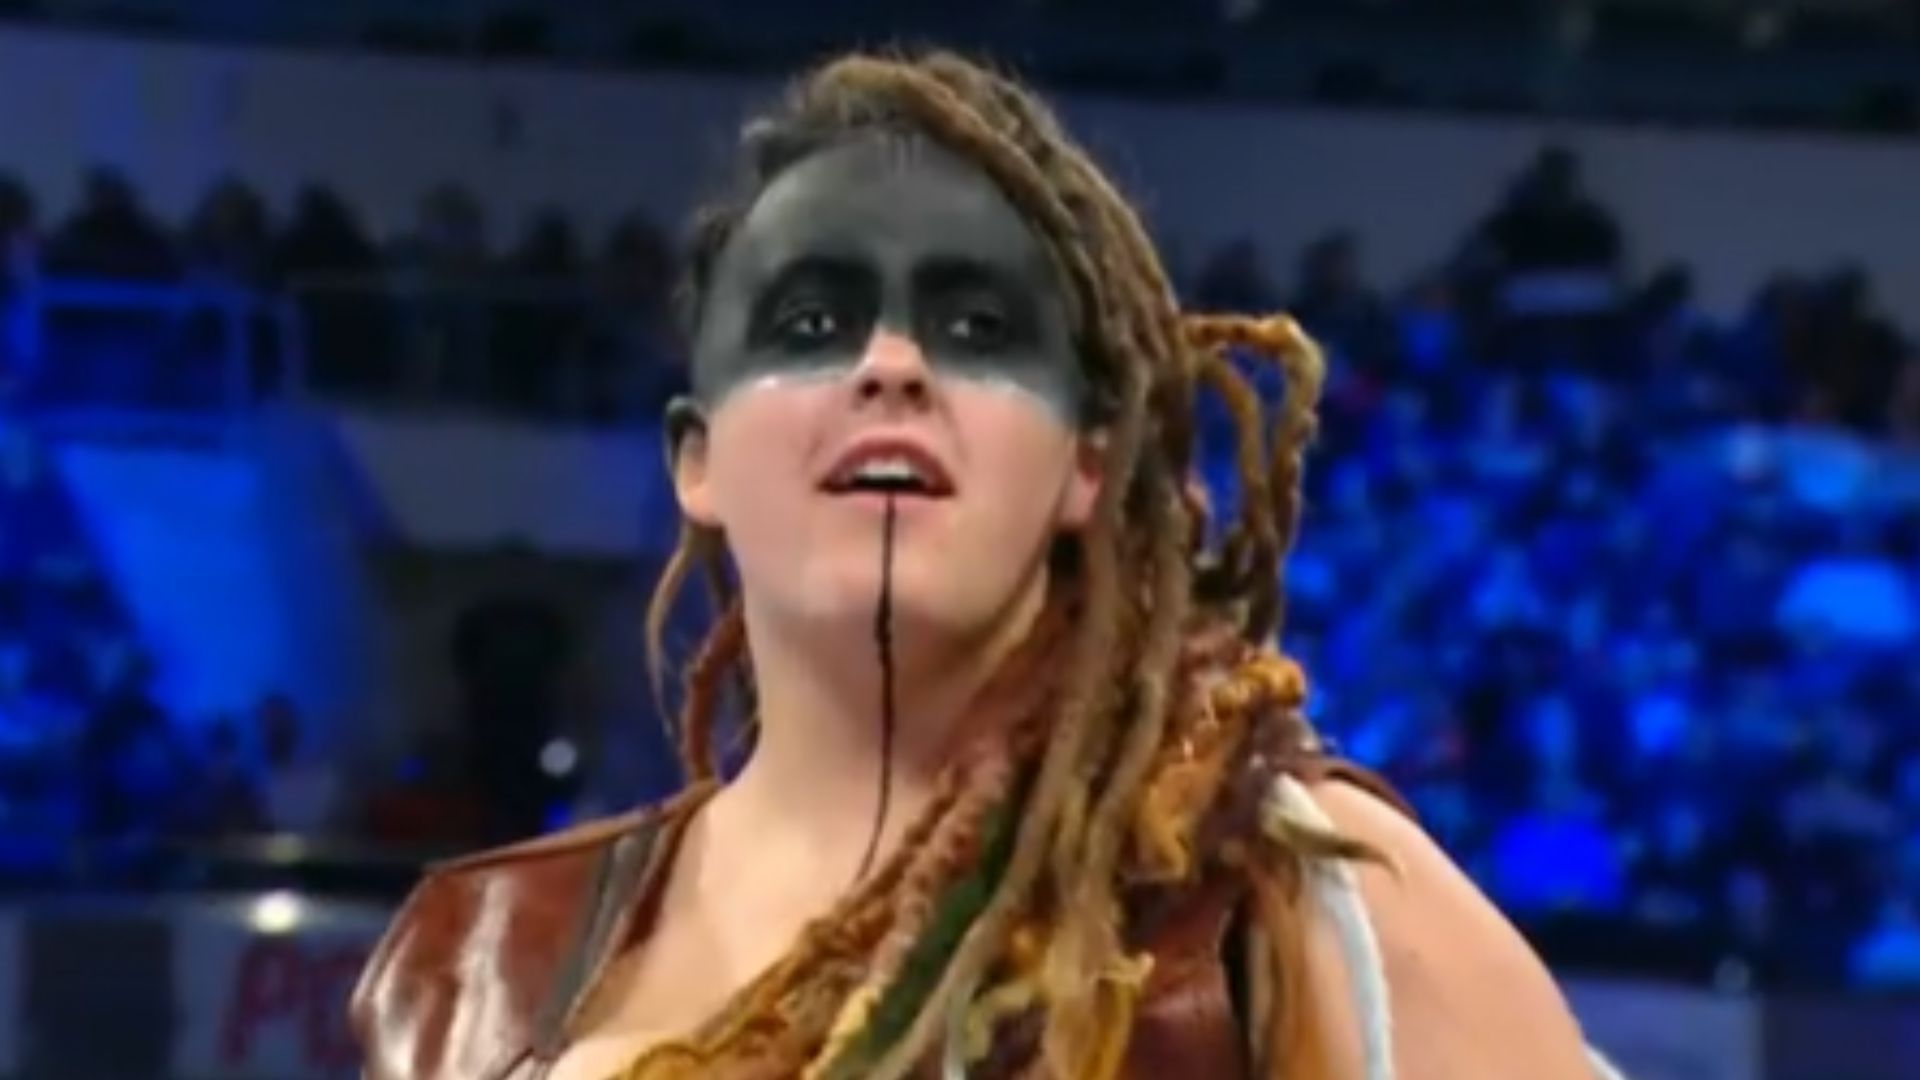 Sarah Logan returned to WWE with a Viking-inspired gimmick.